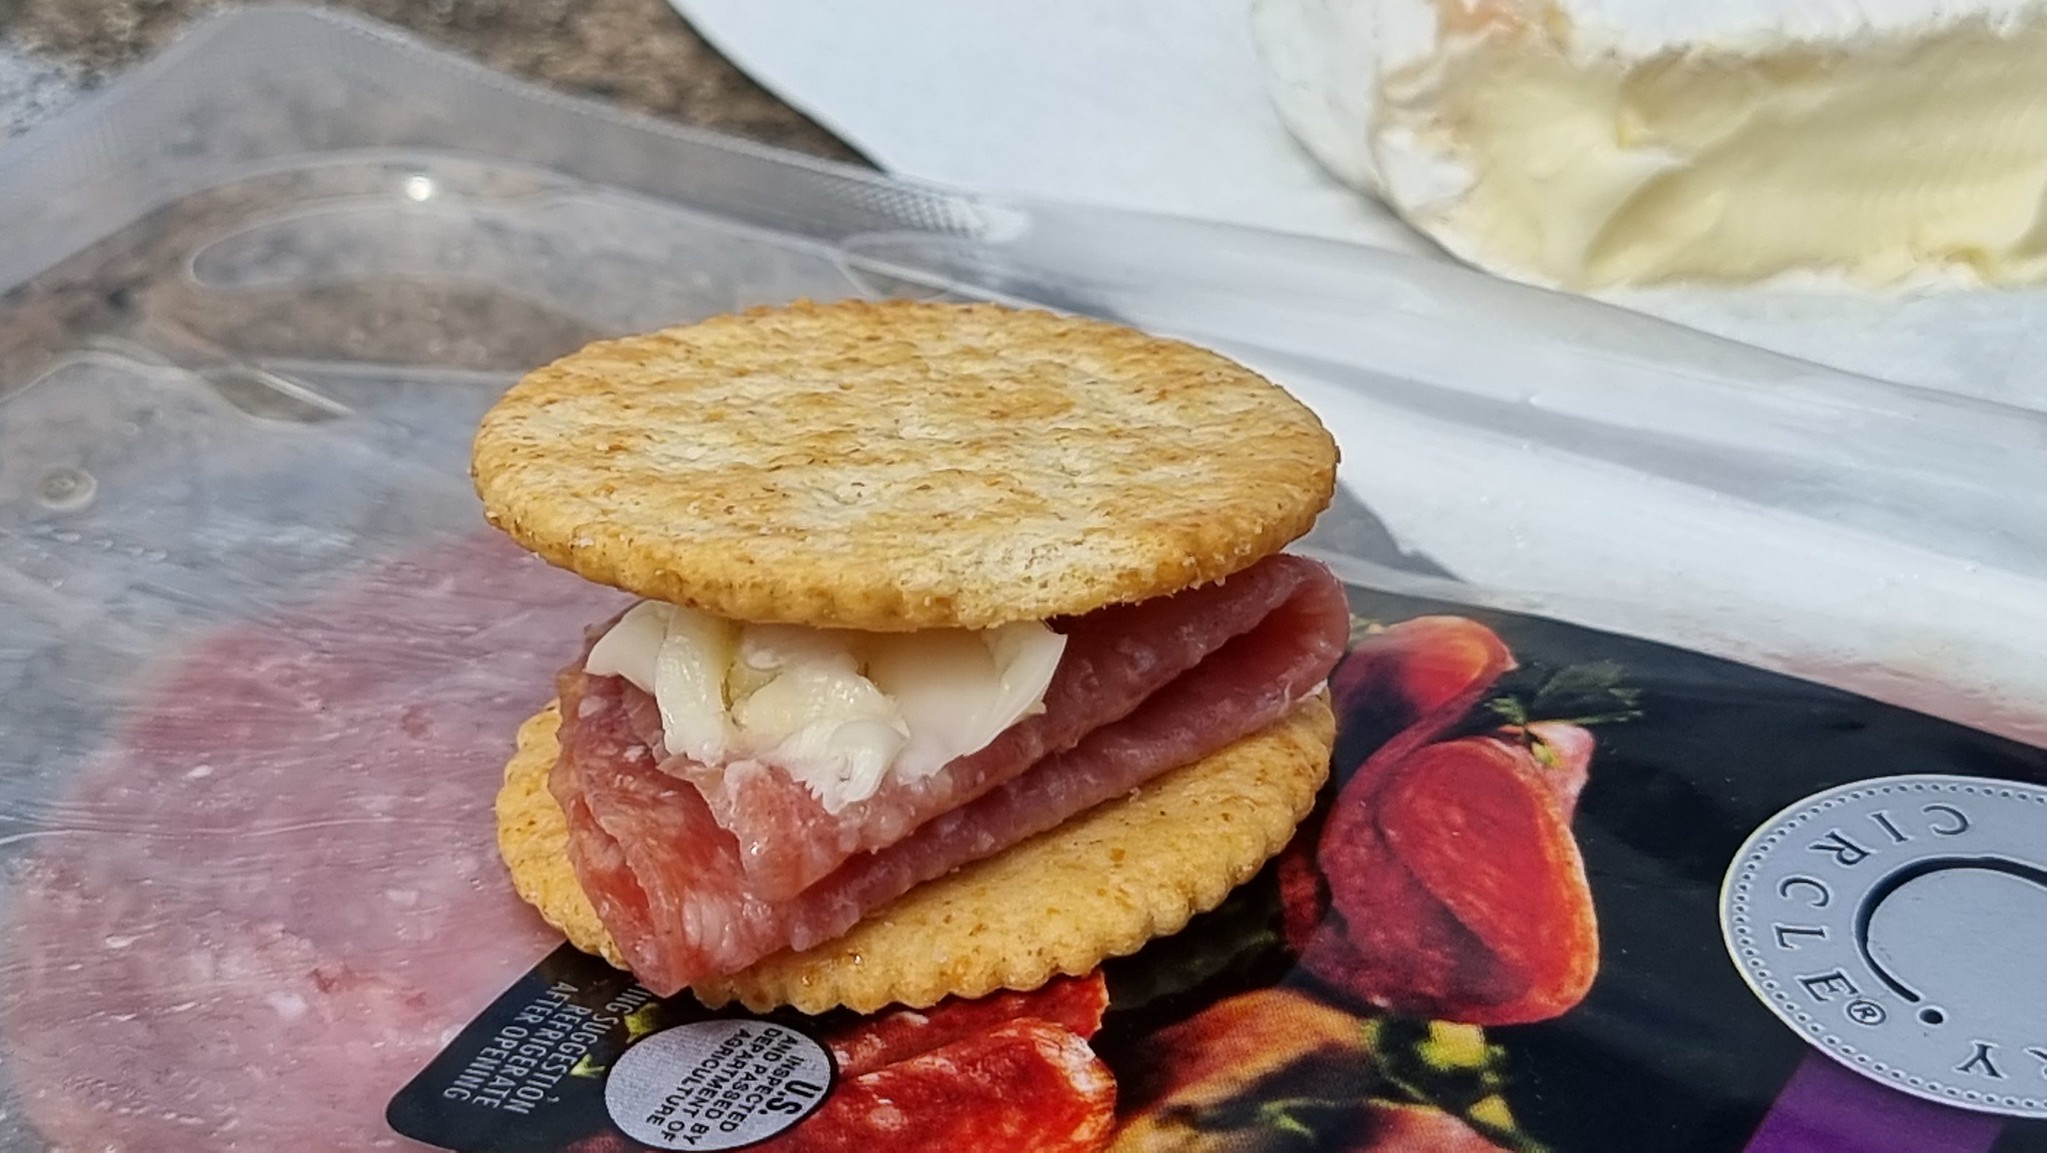 Salami, cheese and crackers for lunch